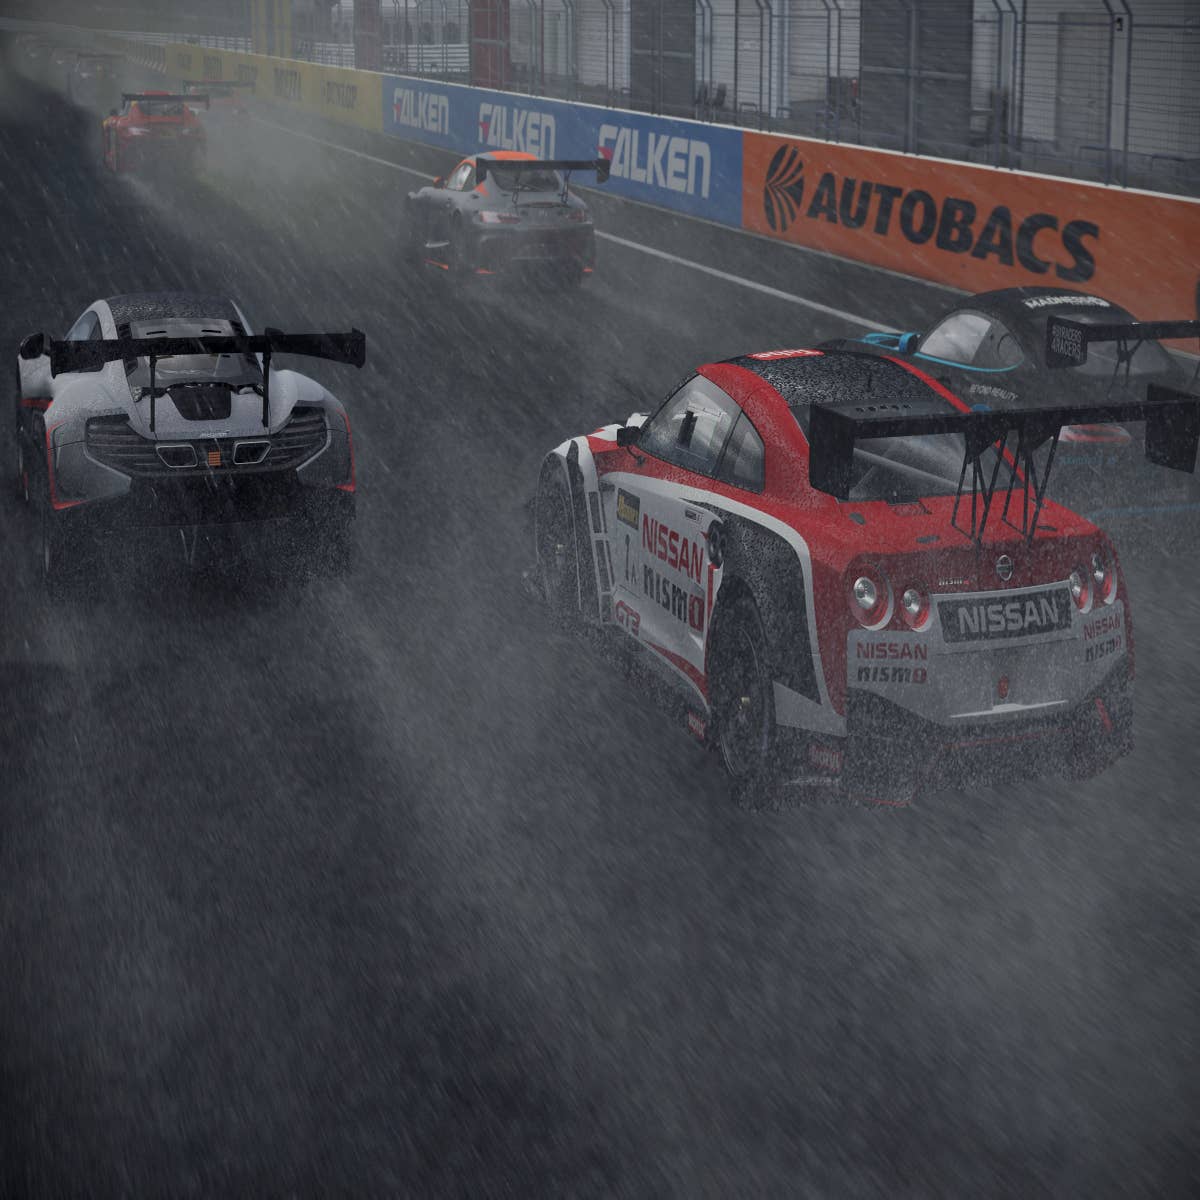 Here's The Full Car List For Project Cars 2, News